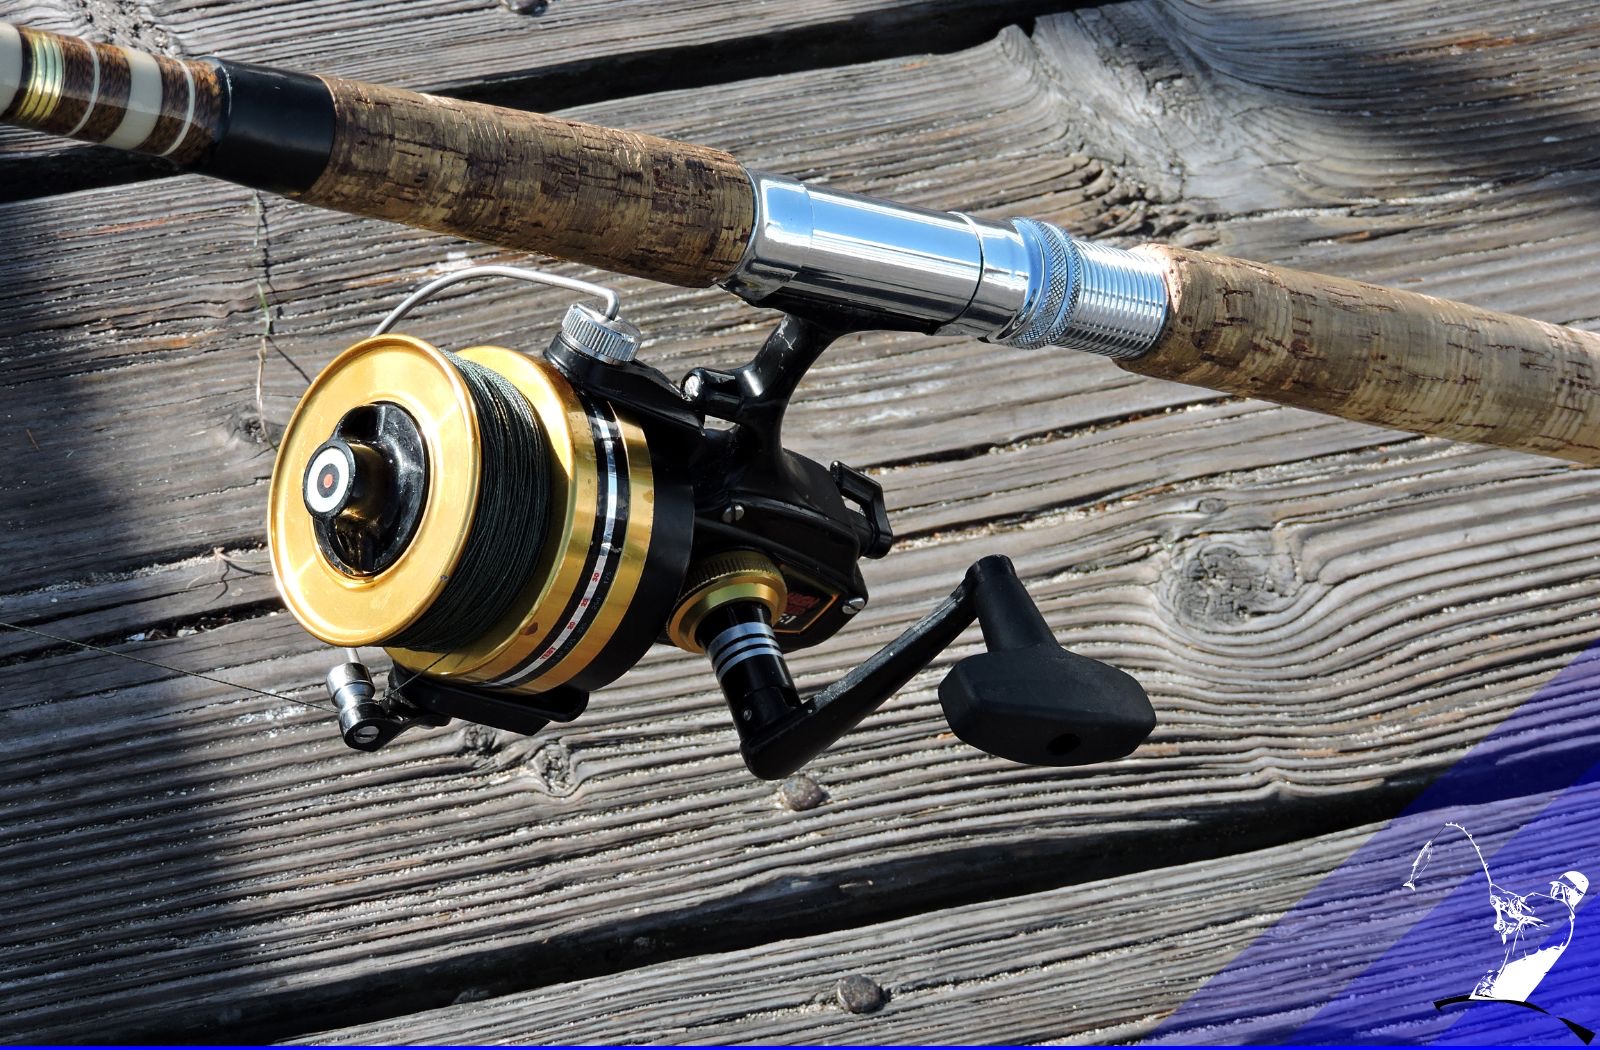 Penn Spinning Reel on Casting Rod with Dock background